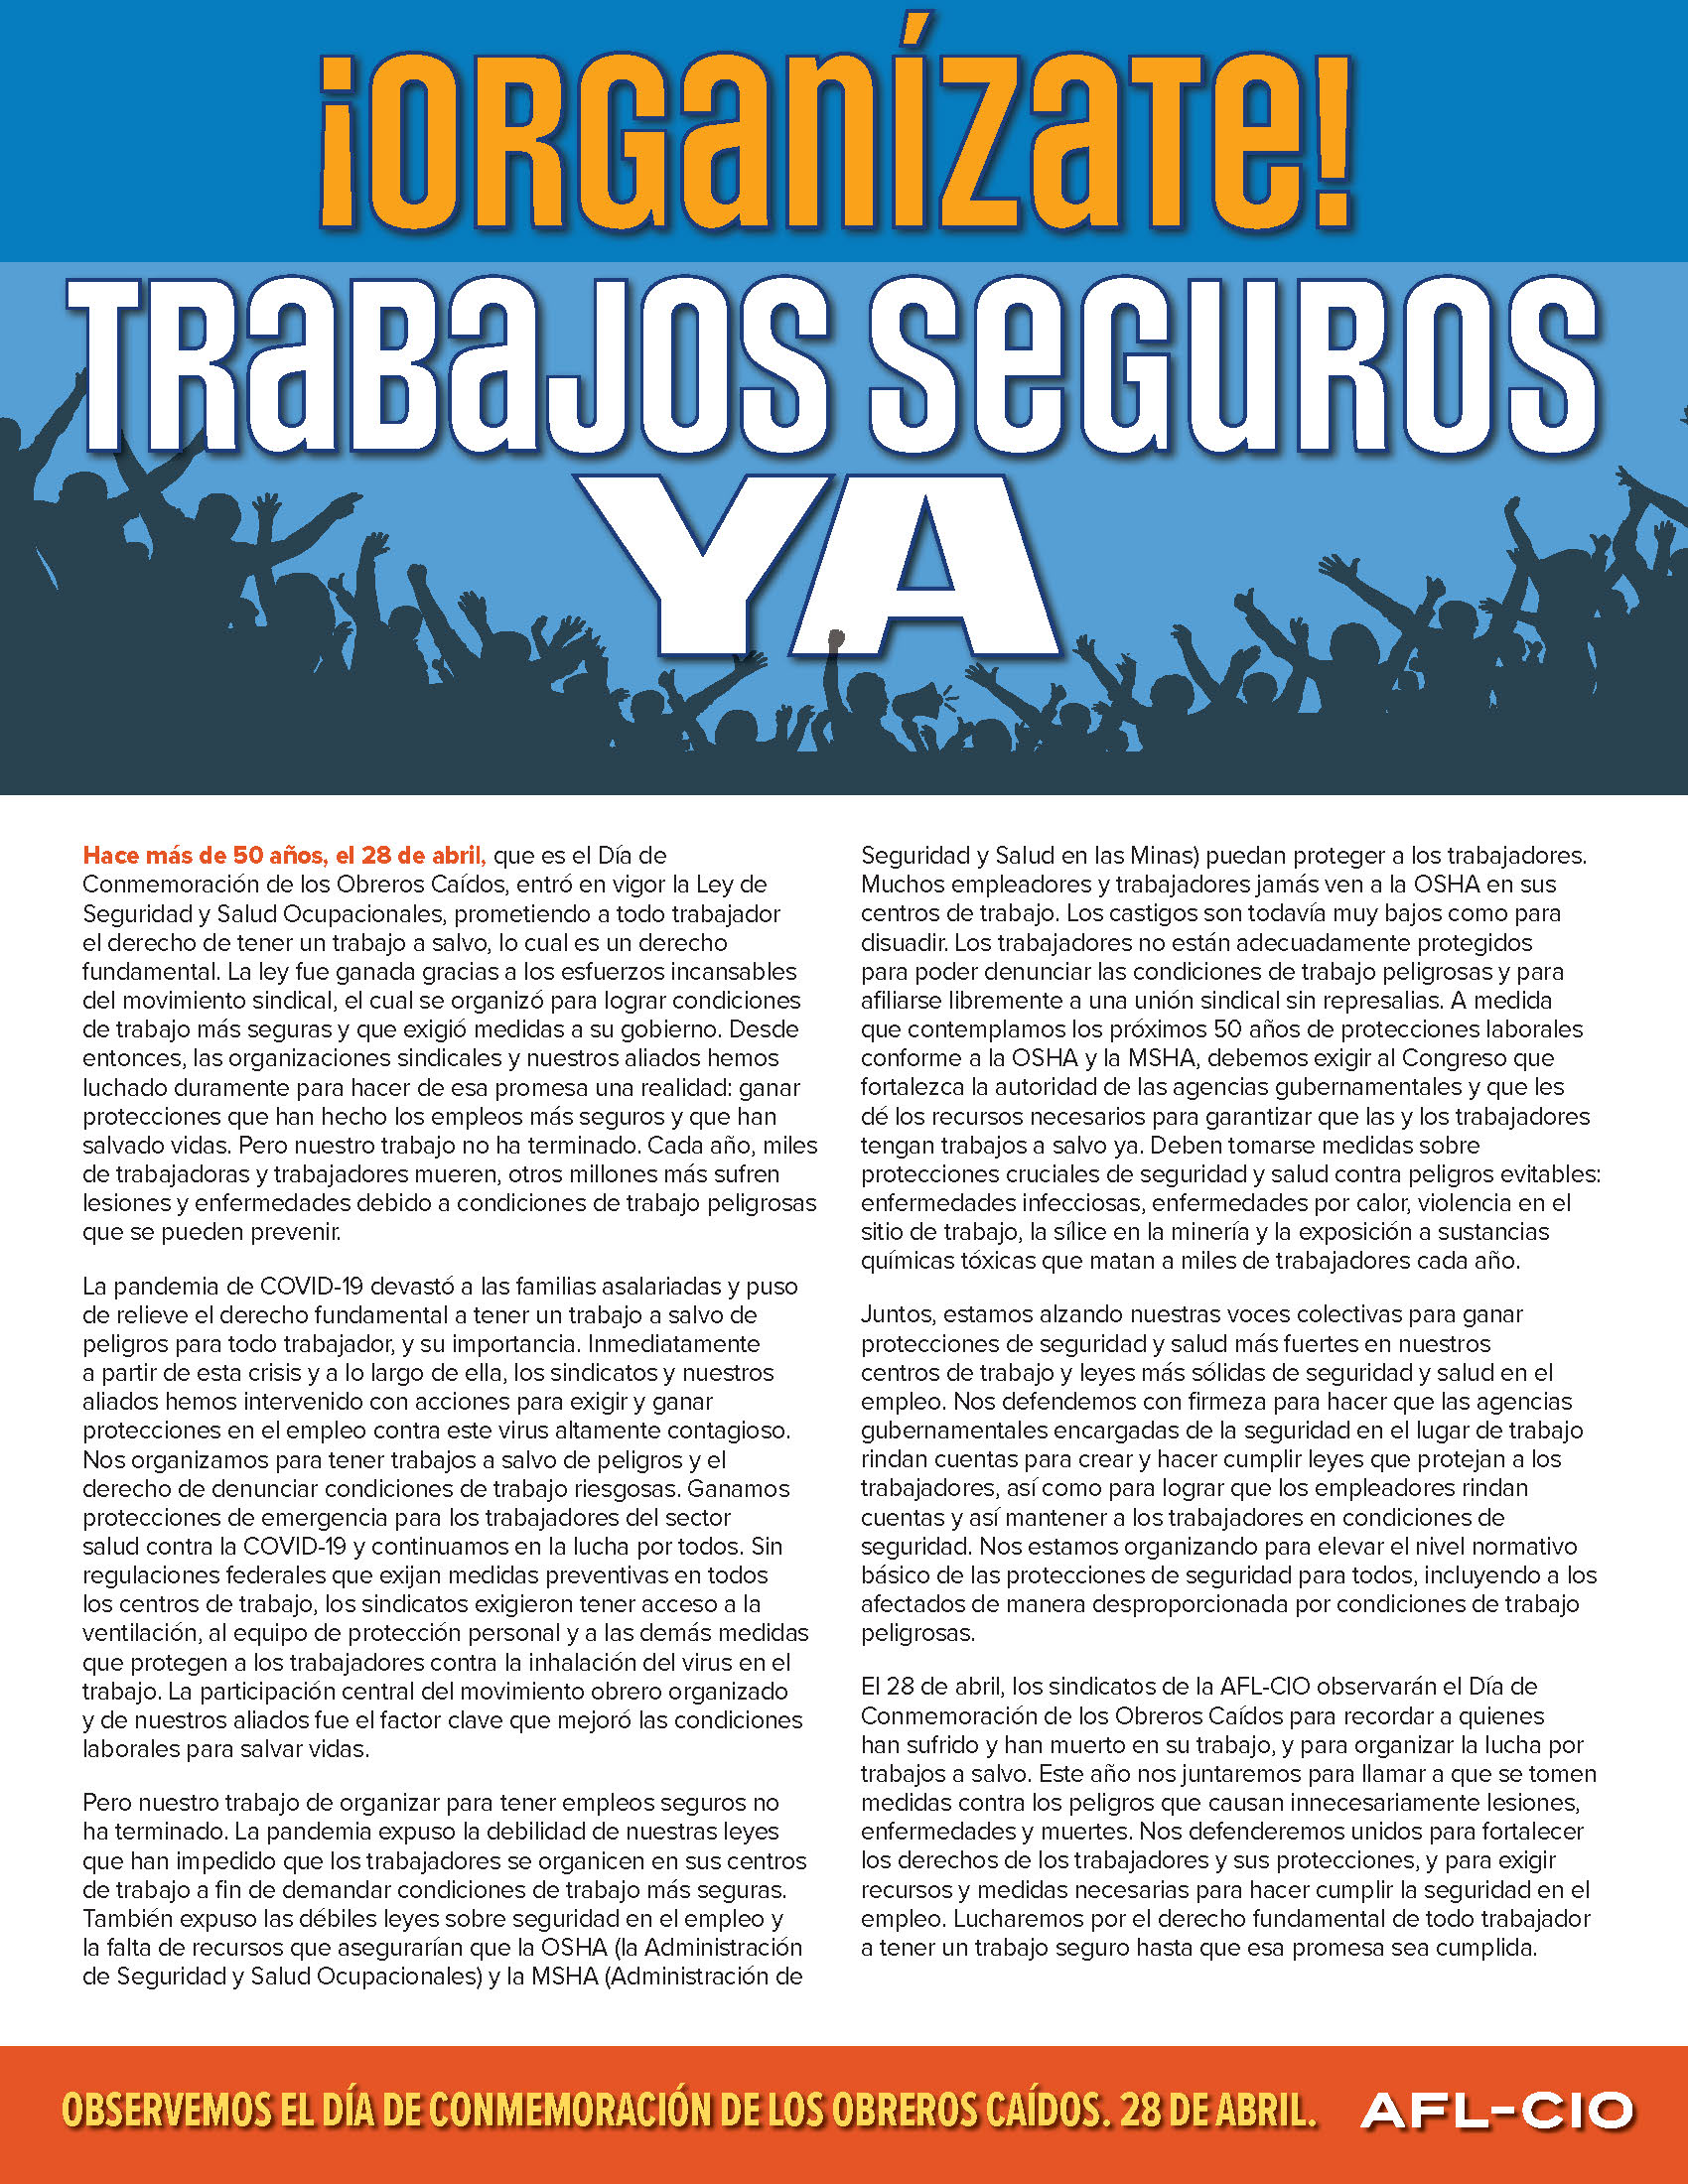 Workers Memorial Day Flyer/Fact Sheet - Spanish